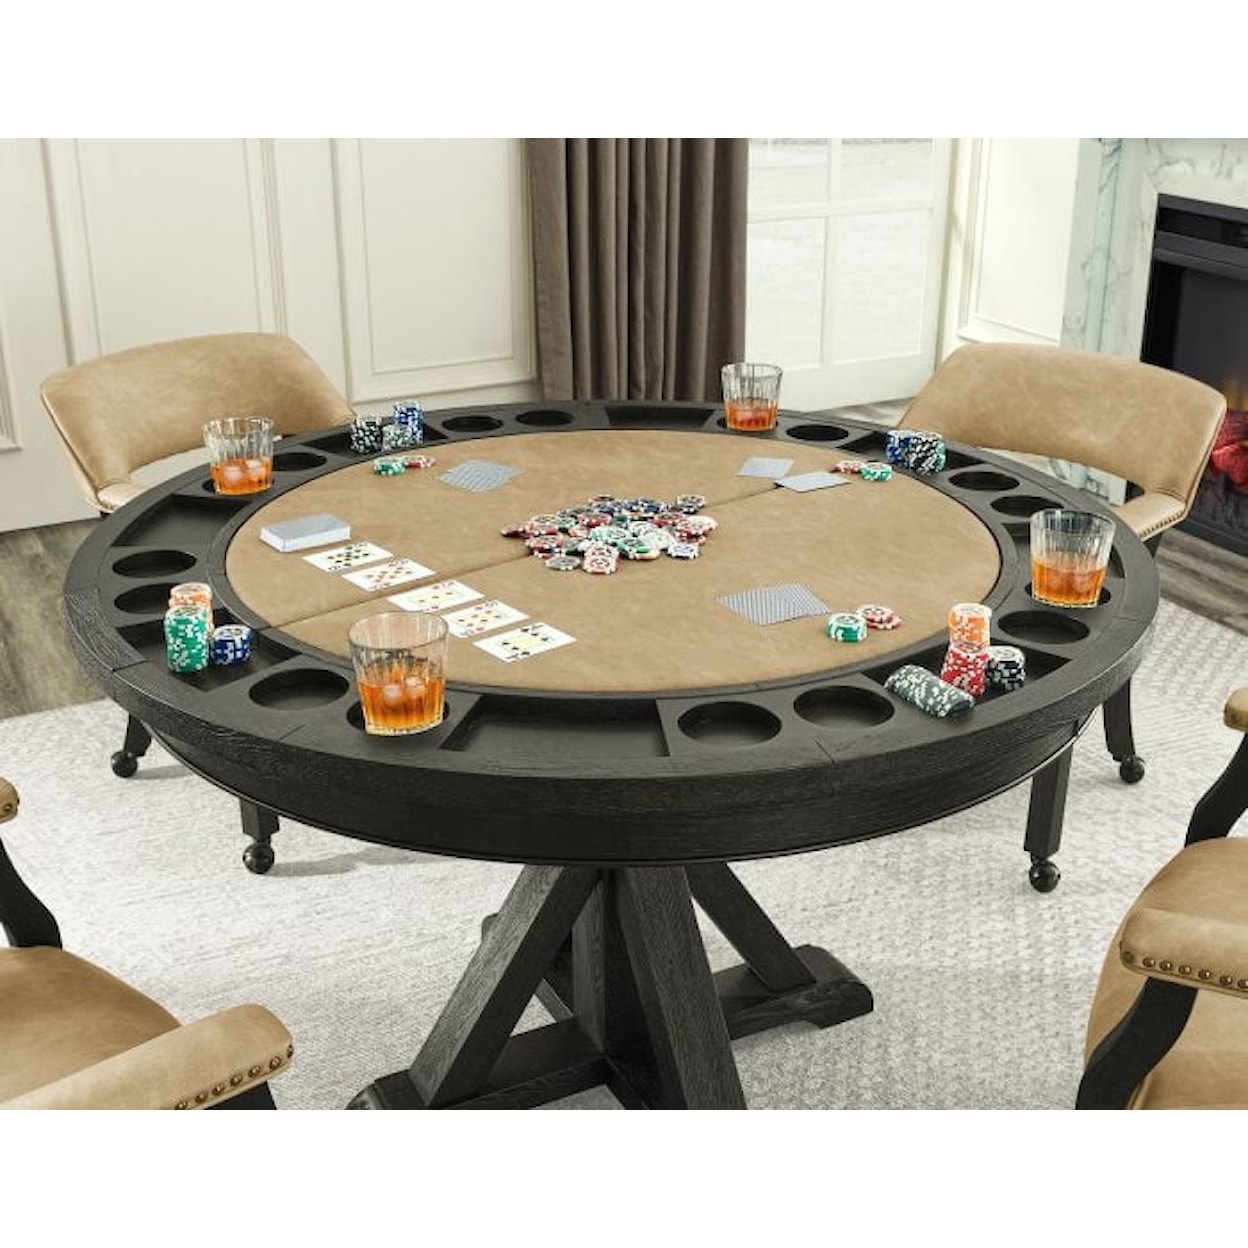 Steve Silver Rylie 6-Piece Game Dining Set